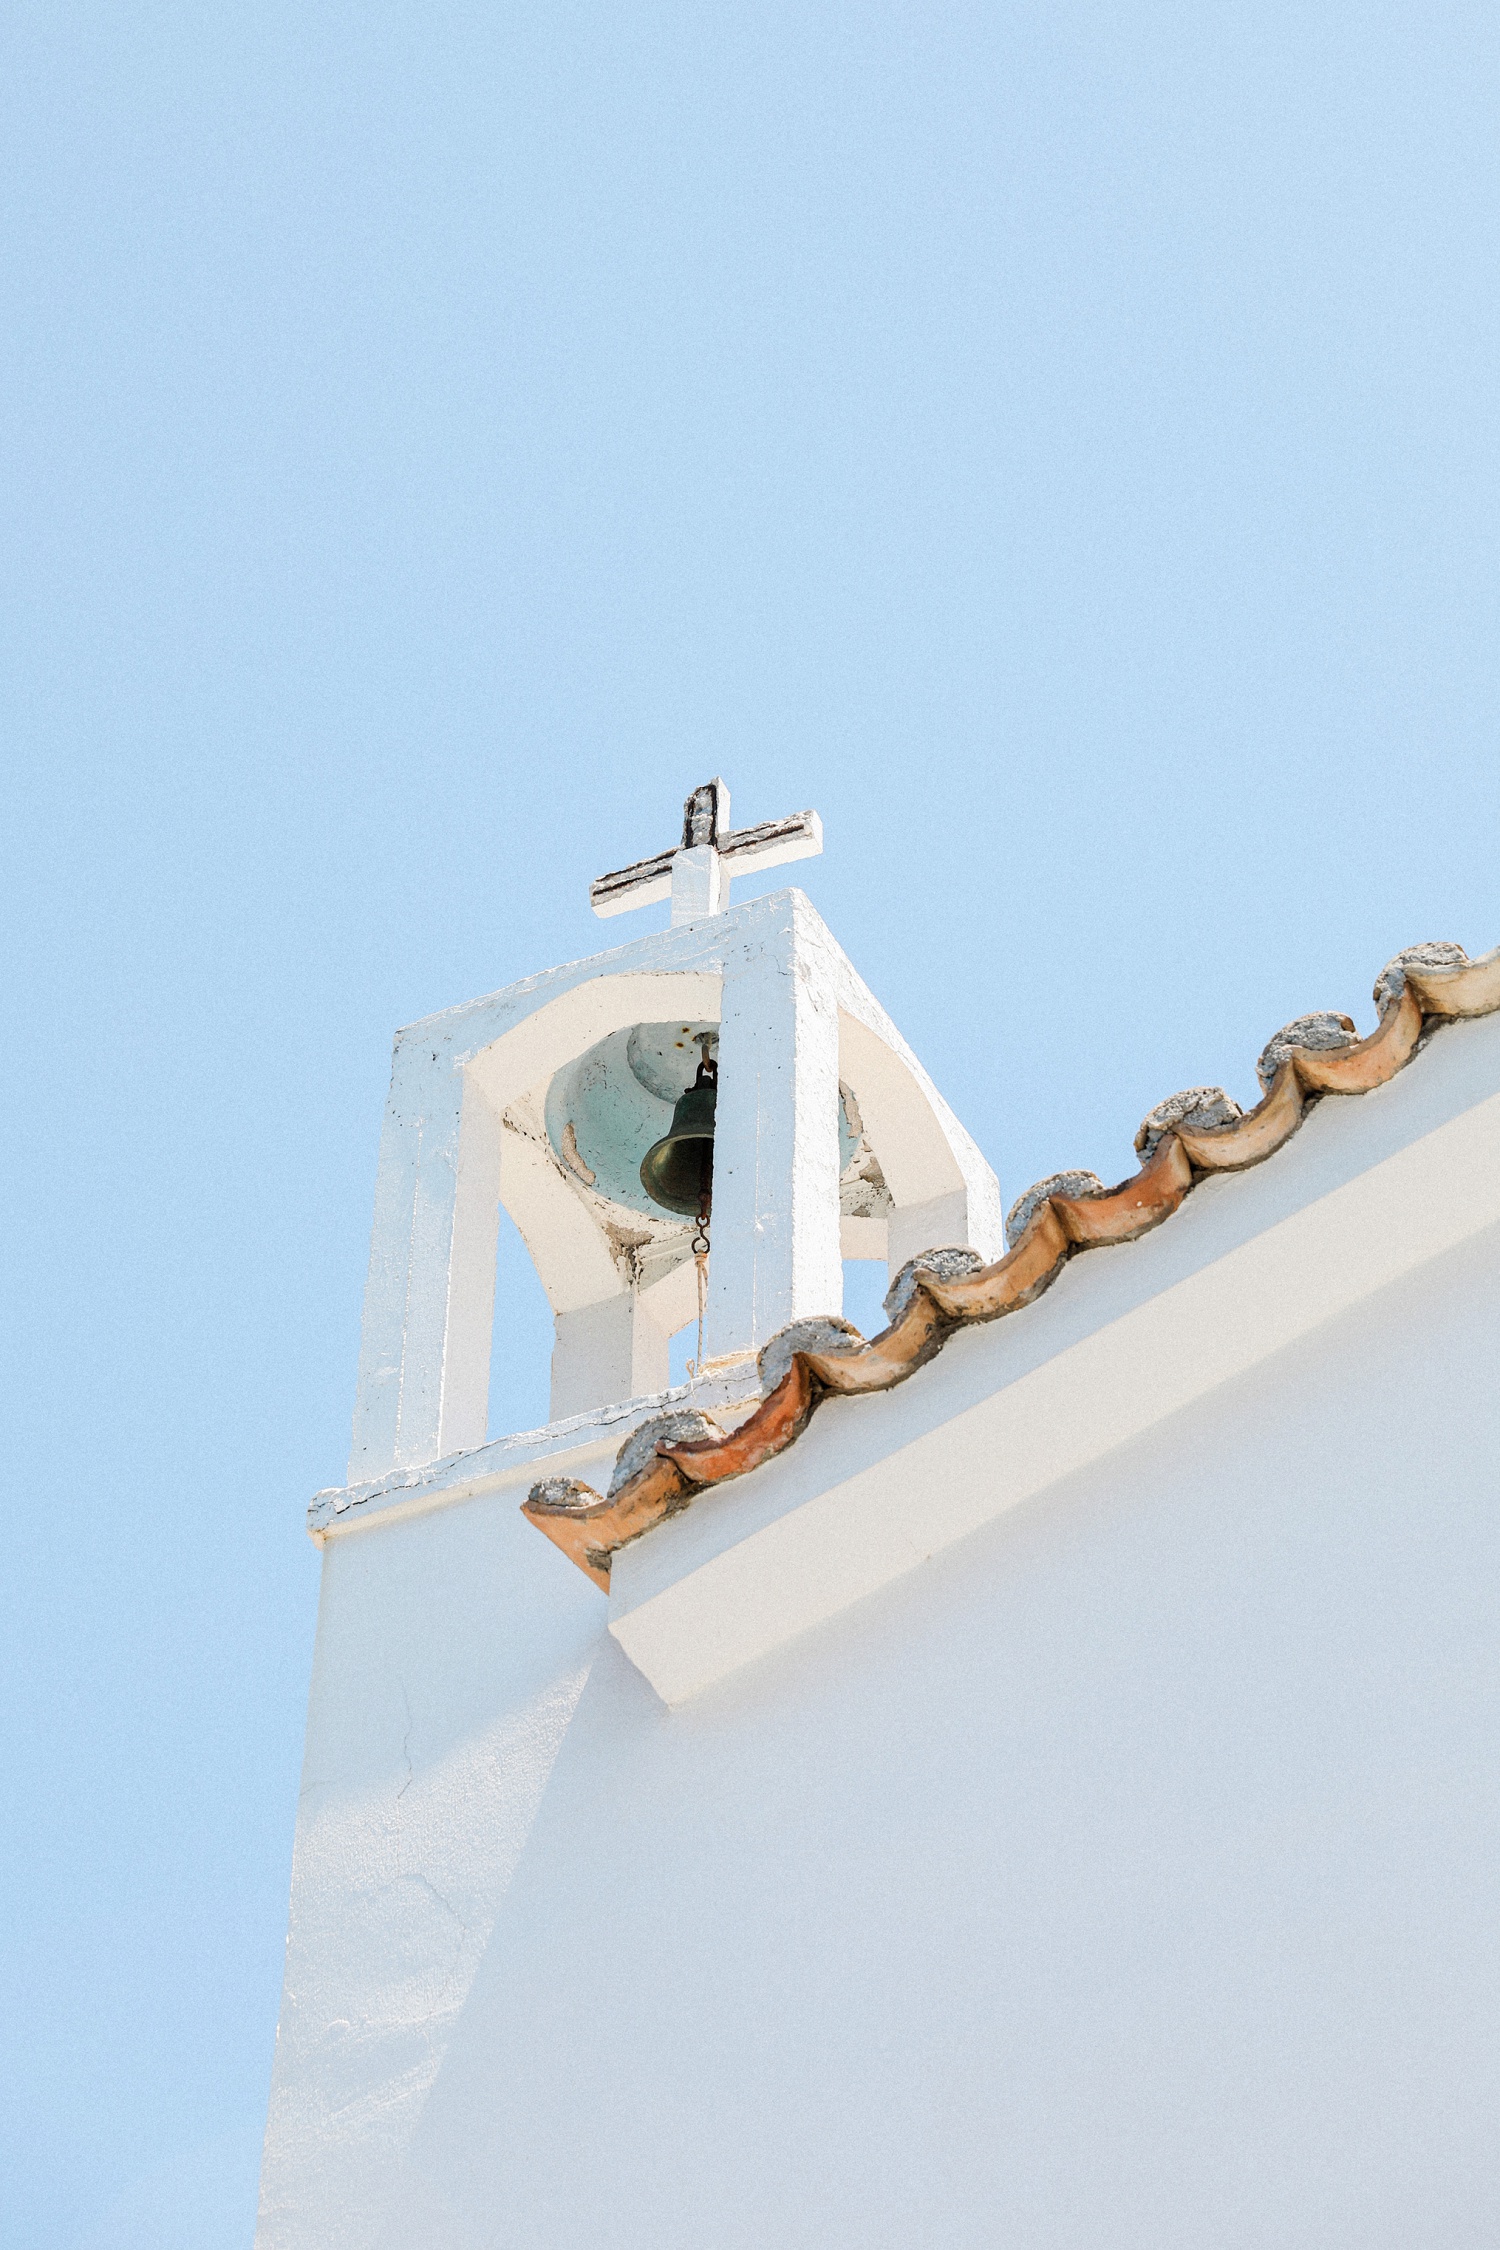 Blue skides behing the white Agios Andreas church steeple on Ithaca island